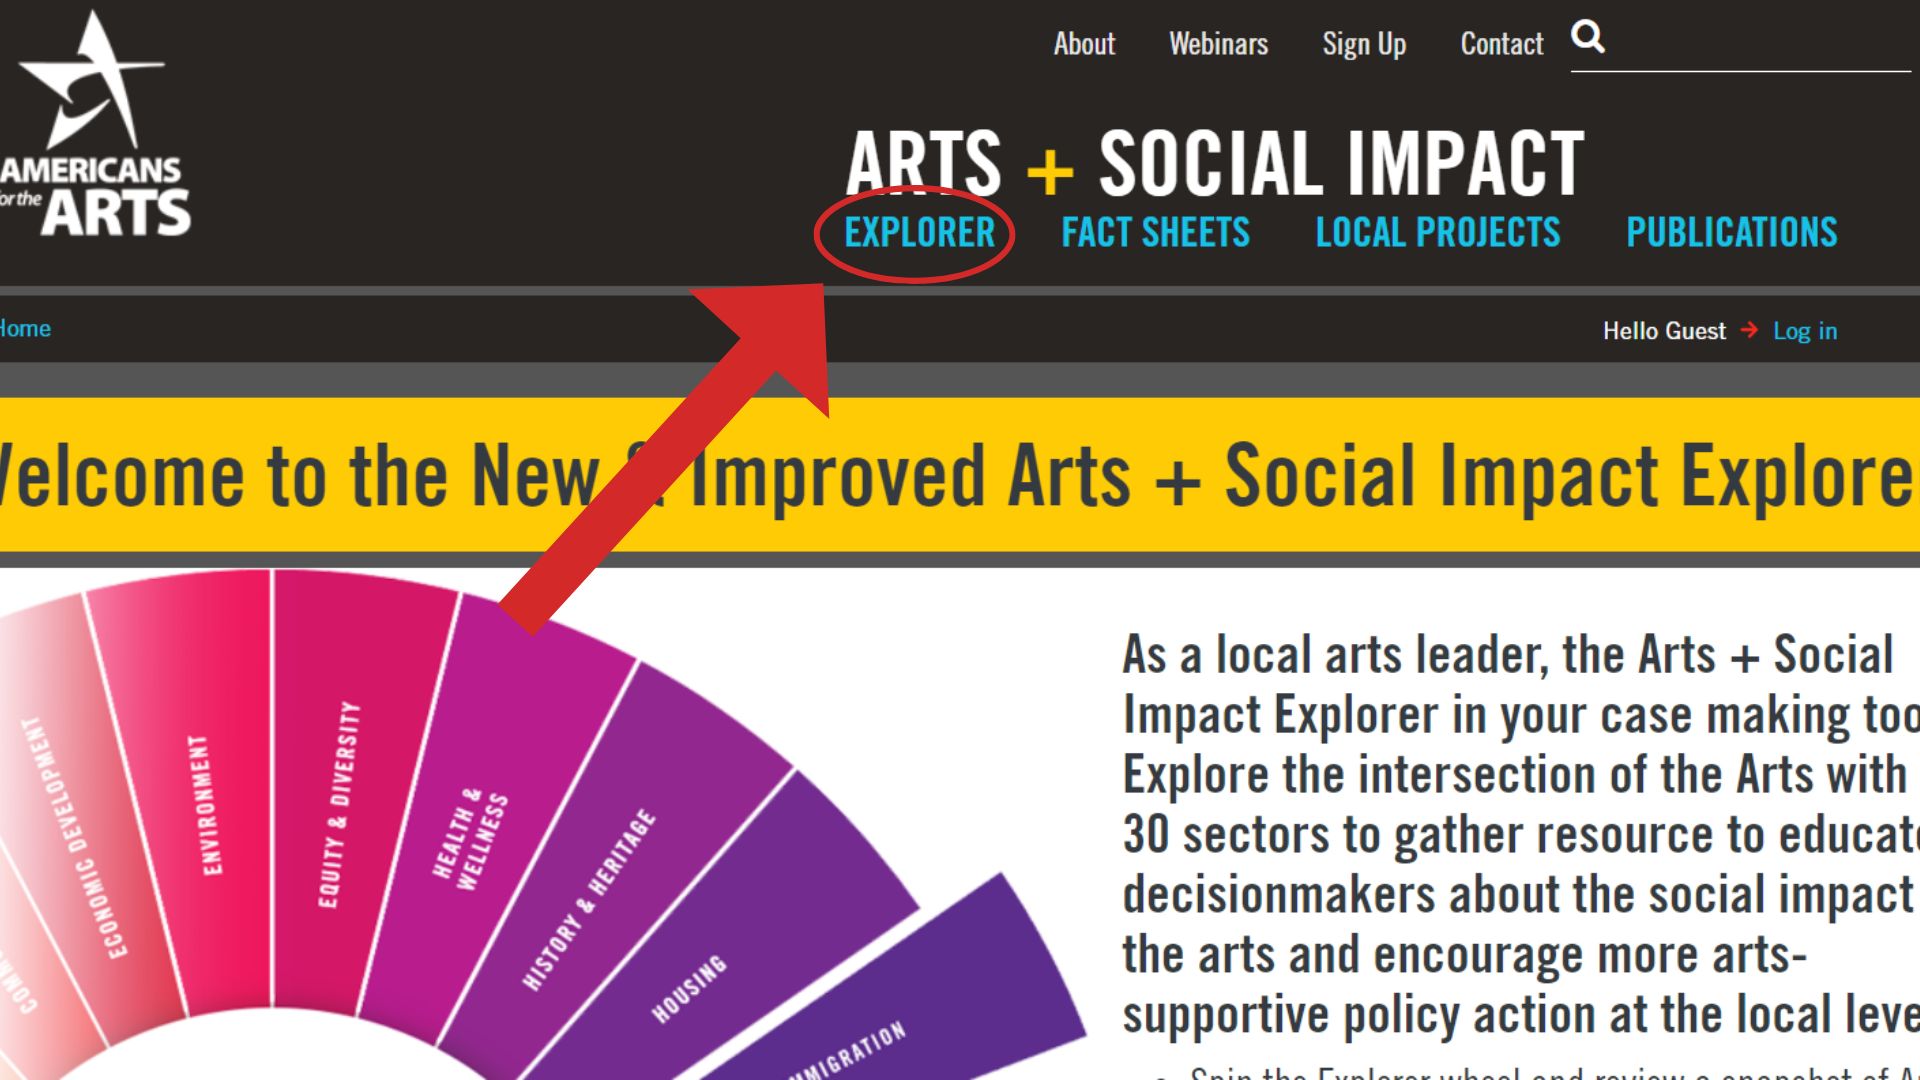 A webpage with a black heading, yellow banner and white background. The webpage features text about the Arts and Social Impact Explorer as well as a cropped image of the wheel. The wheel features different shades of red and purple with text on the slices of the wheel. There is a red arrow pointing to a red circle in the middle of the page. Within the red circle is a word in blue that reads 'Explorer'.